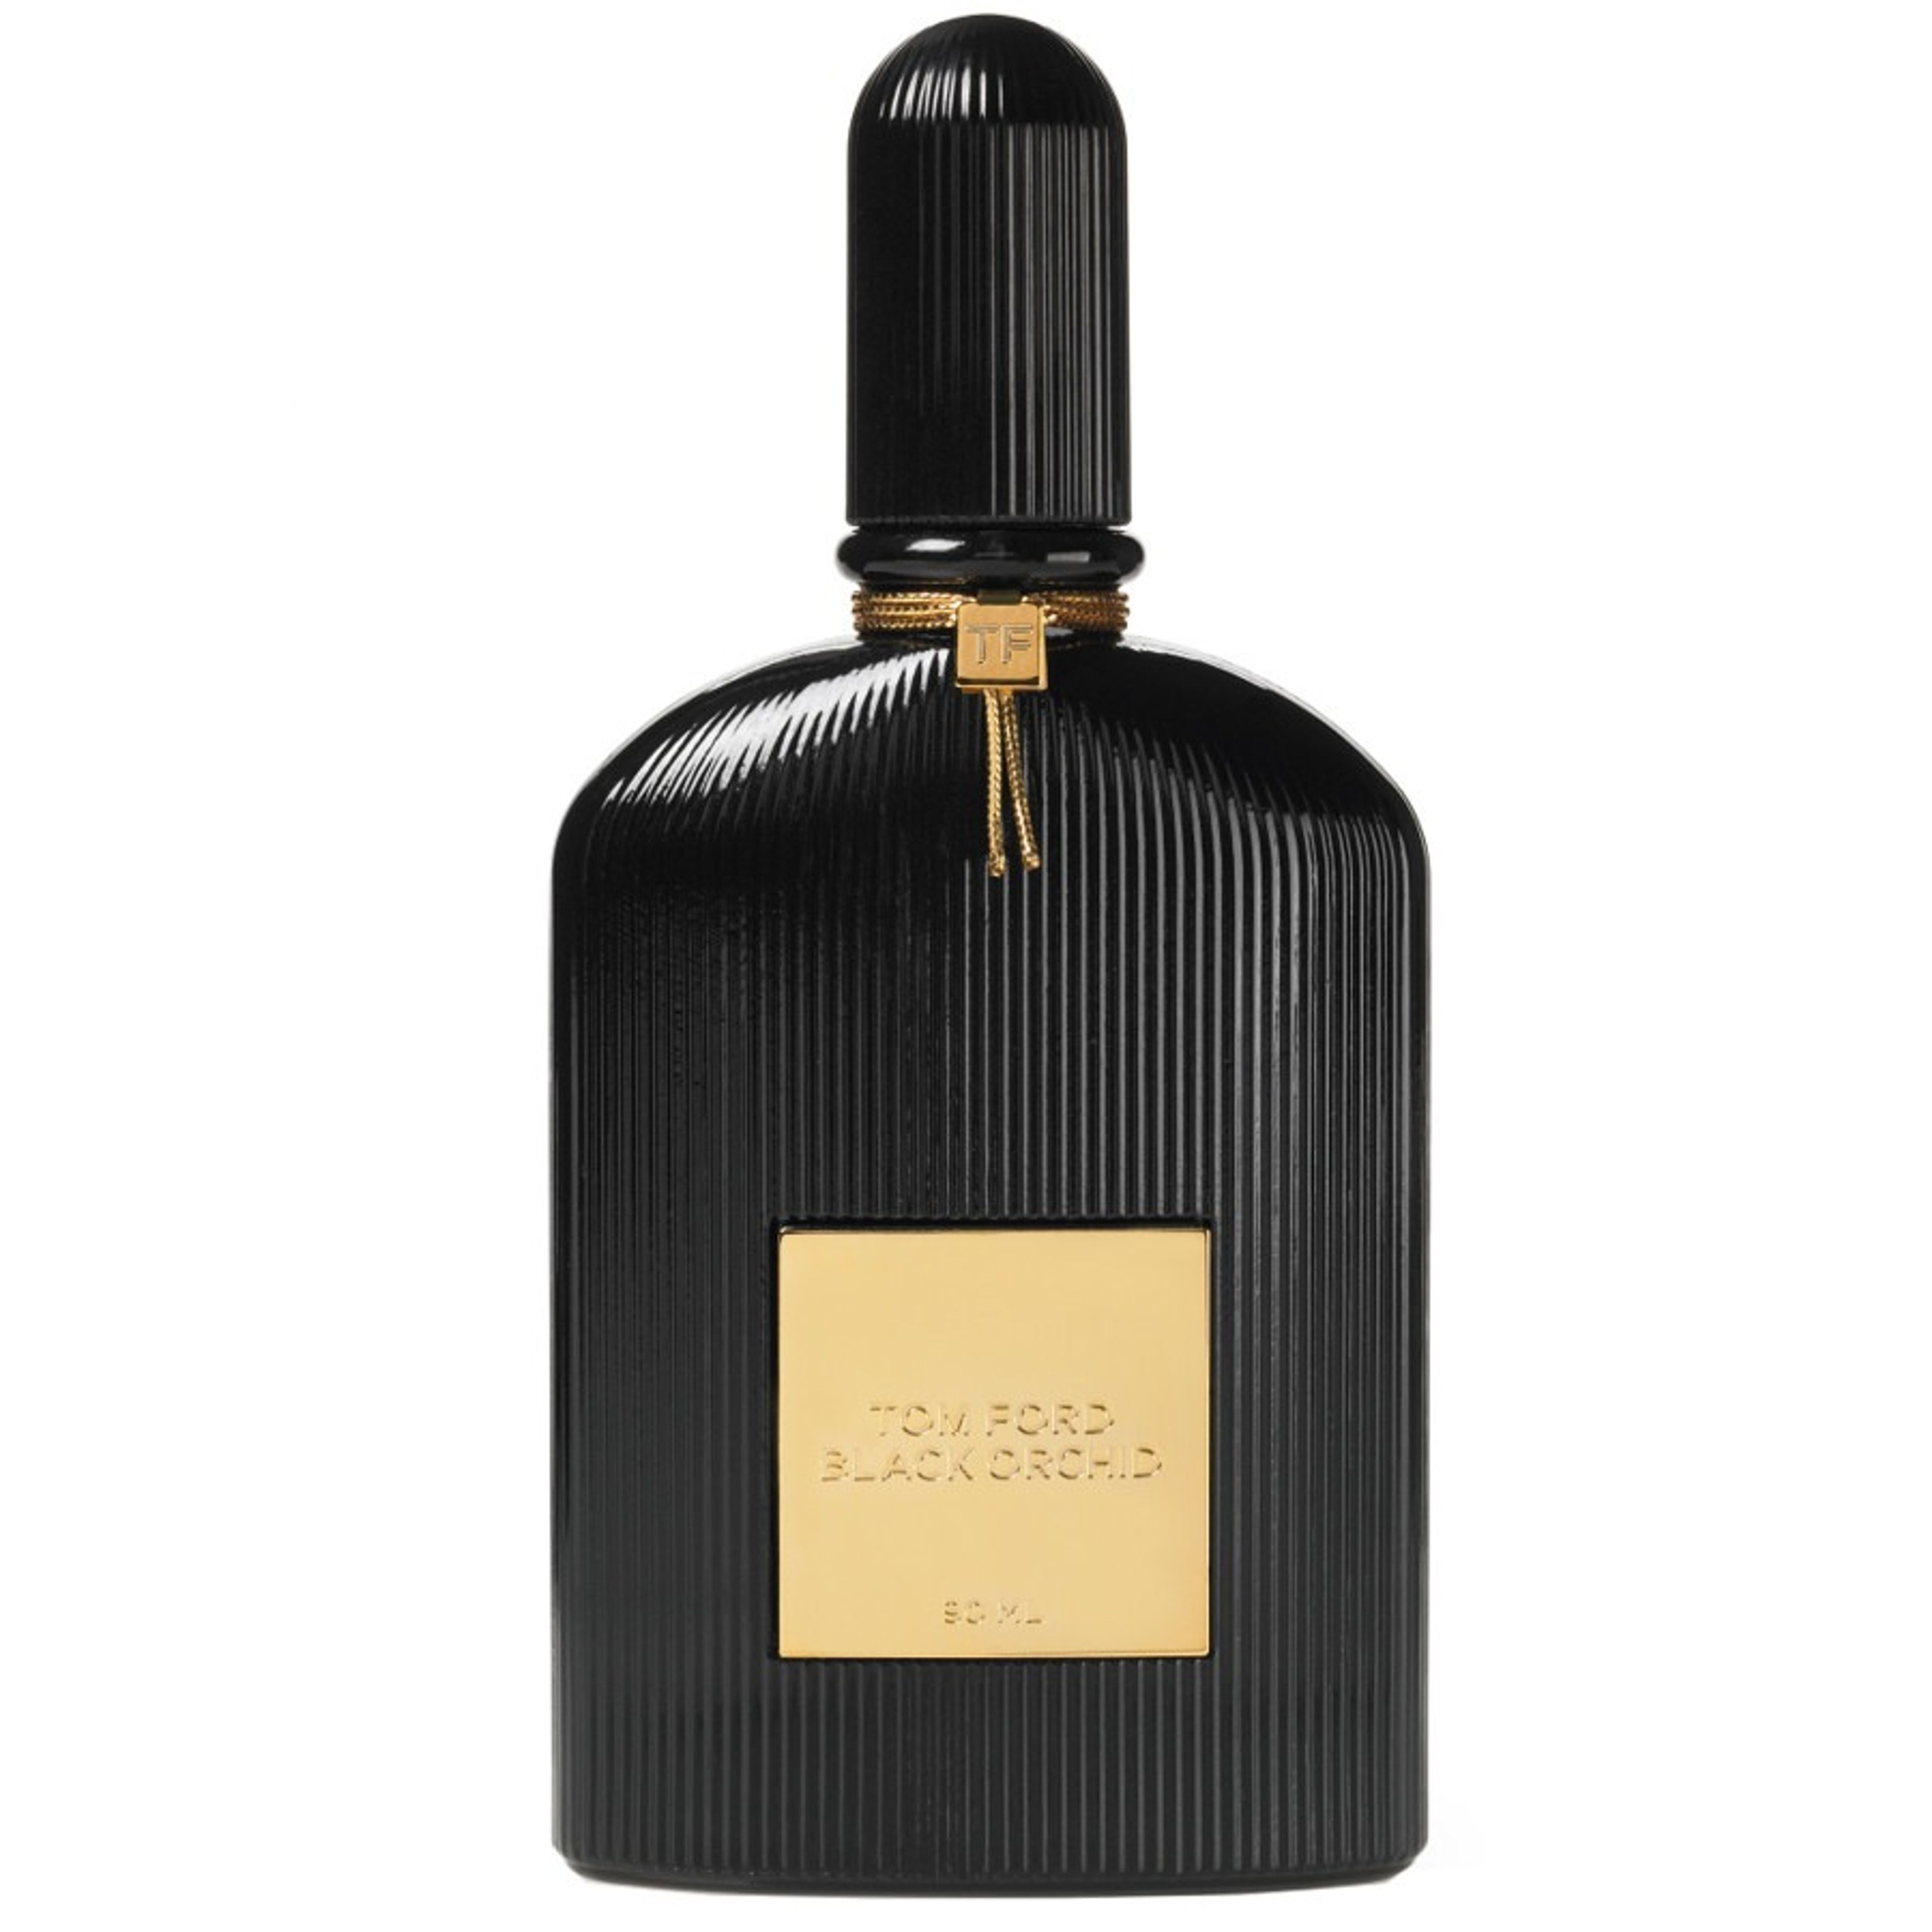 Tom Ford Black Orchid Edp 1